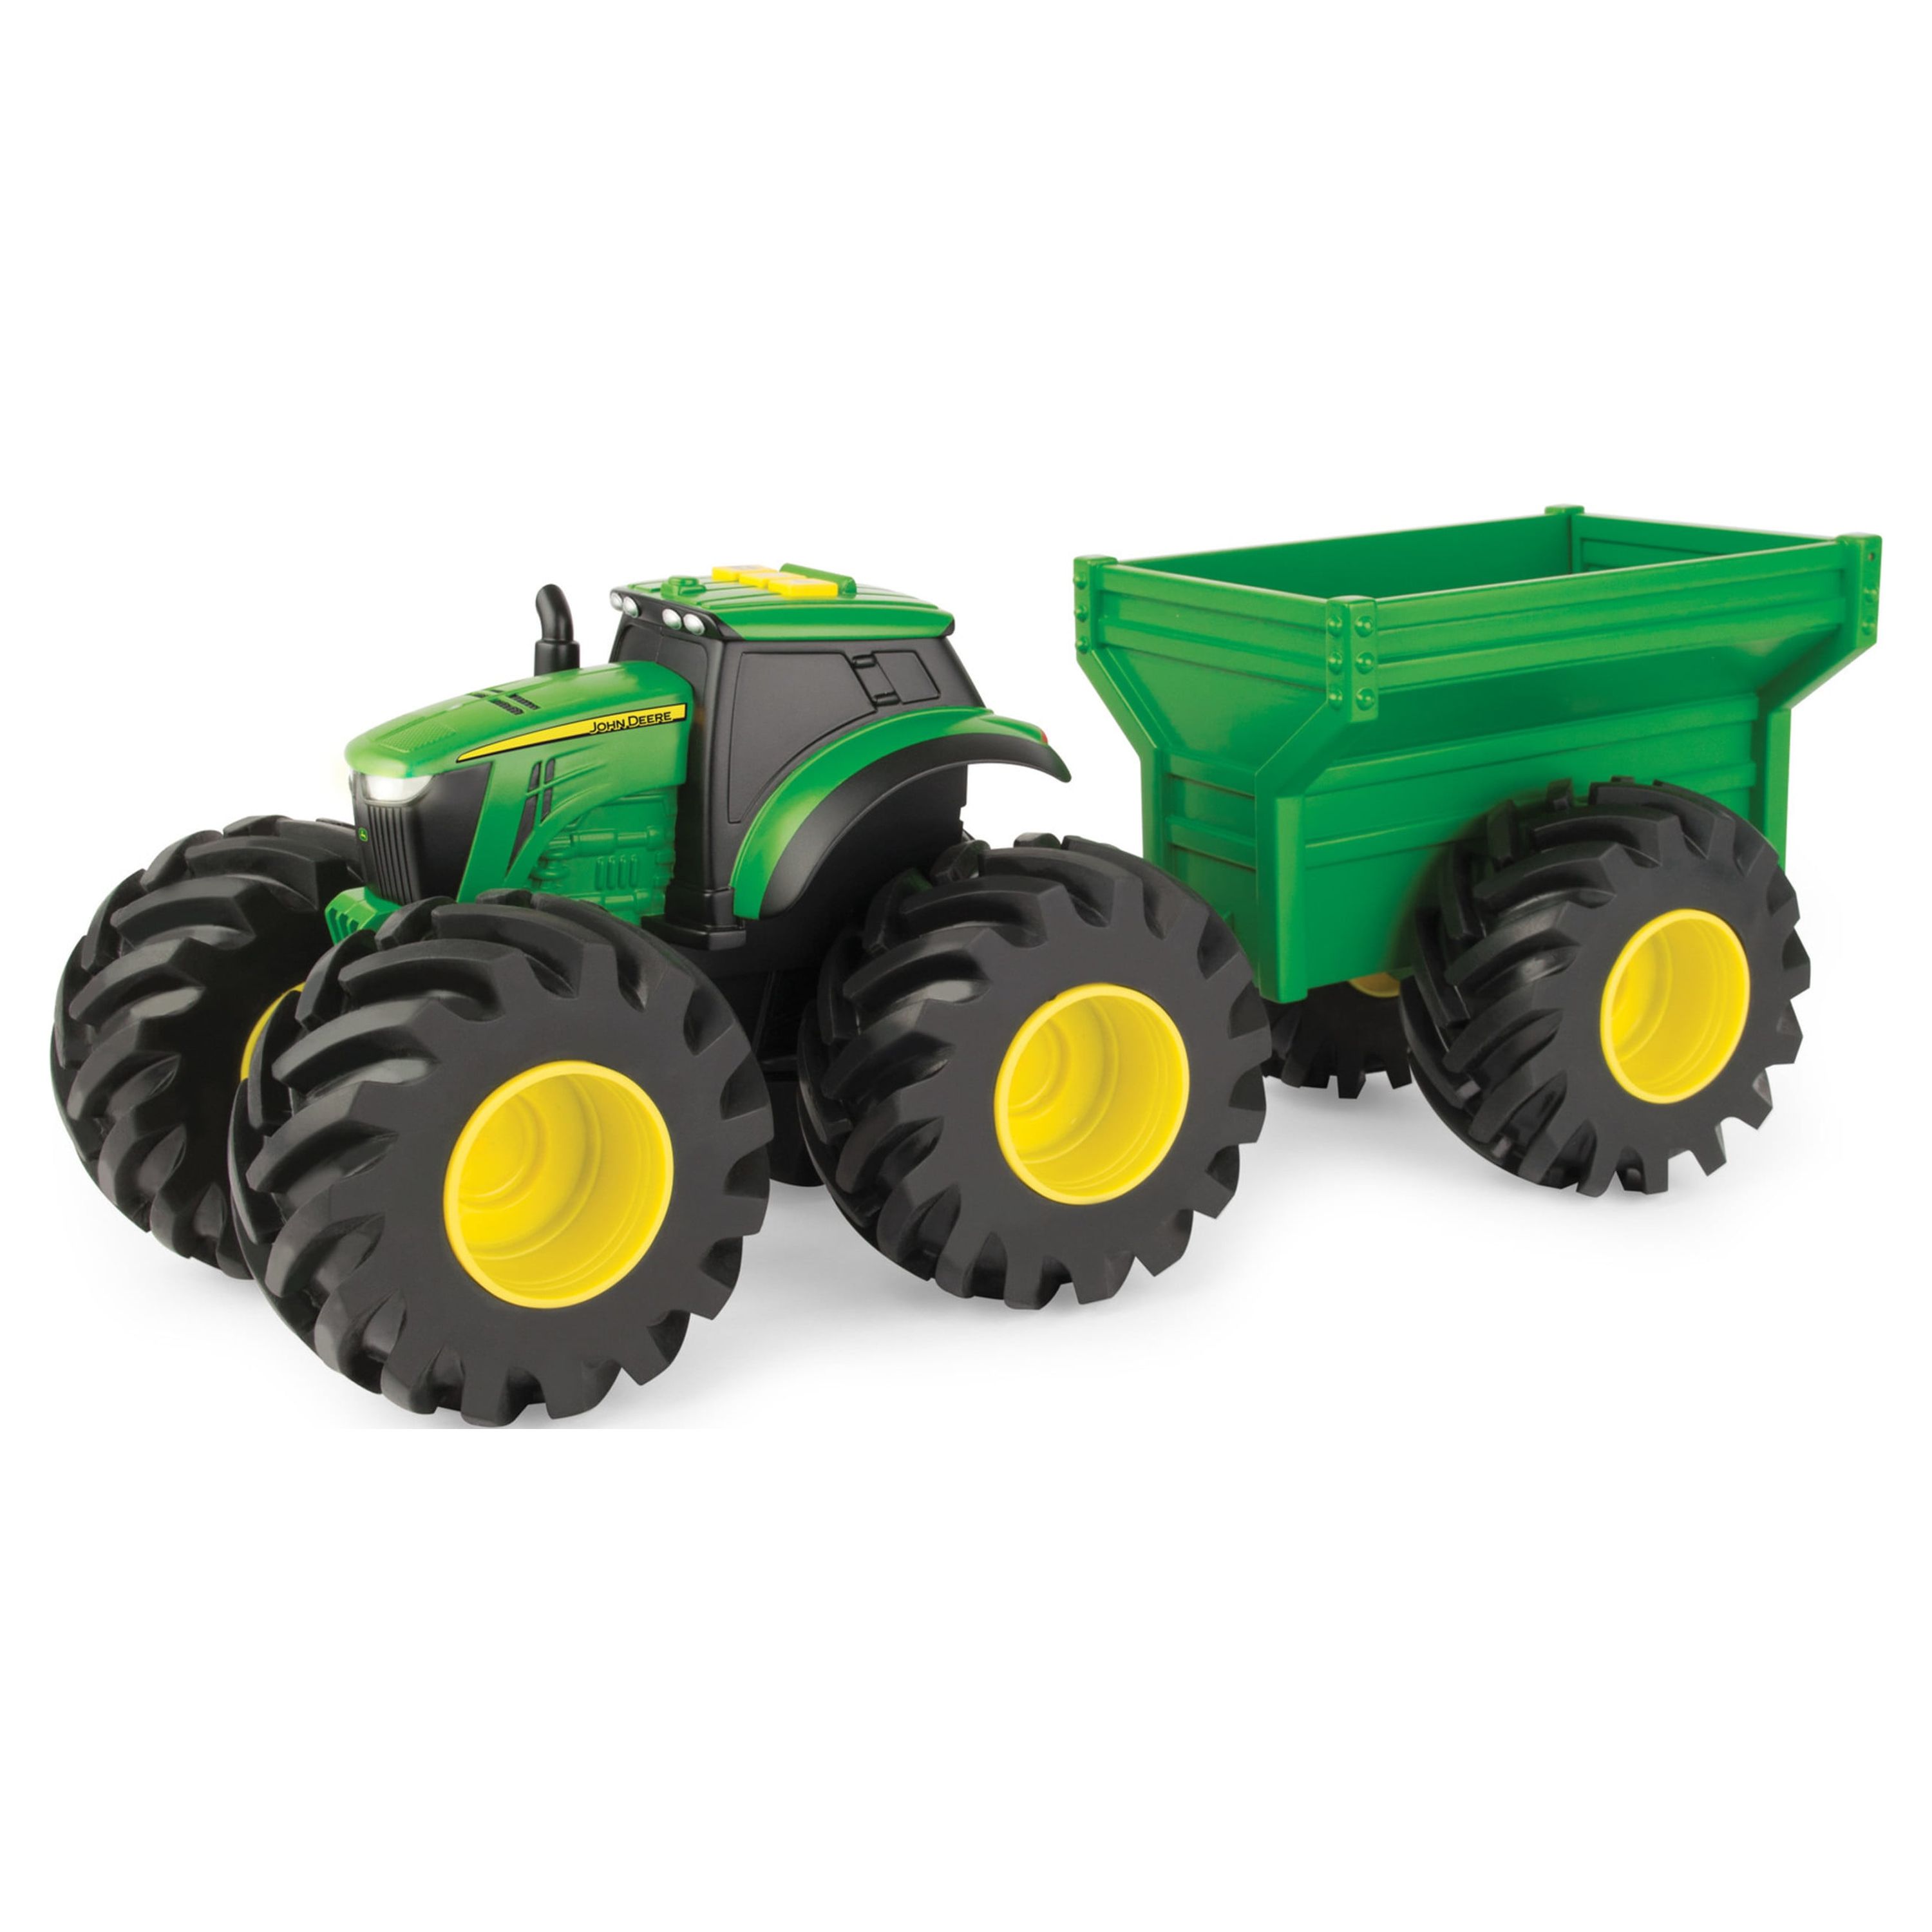 John Deere Monster Treads Lights & Sounds 8 inch Tractor with Wagon - image 1 of 9